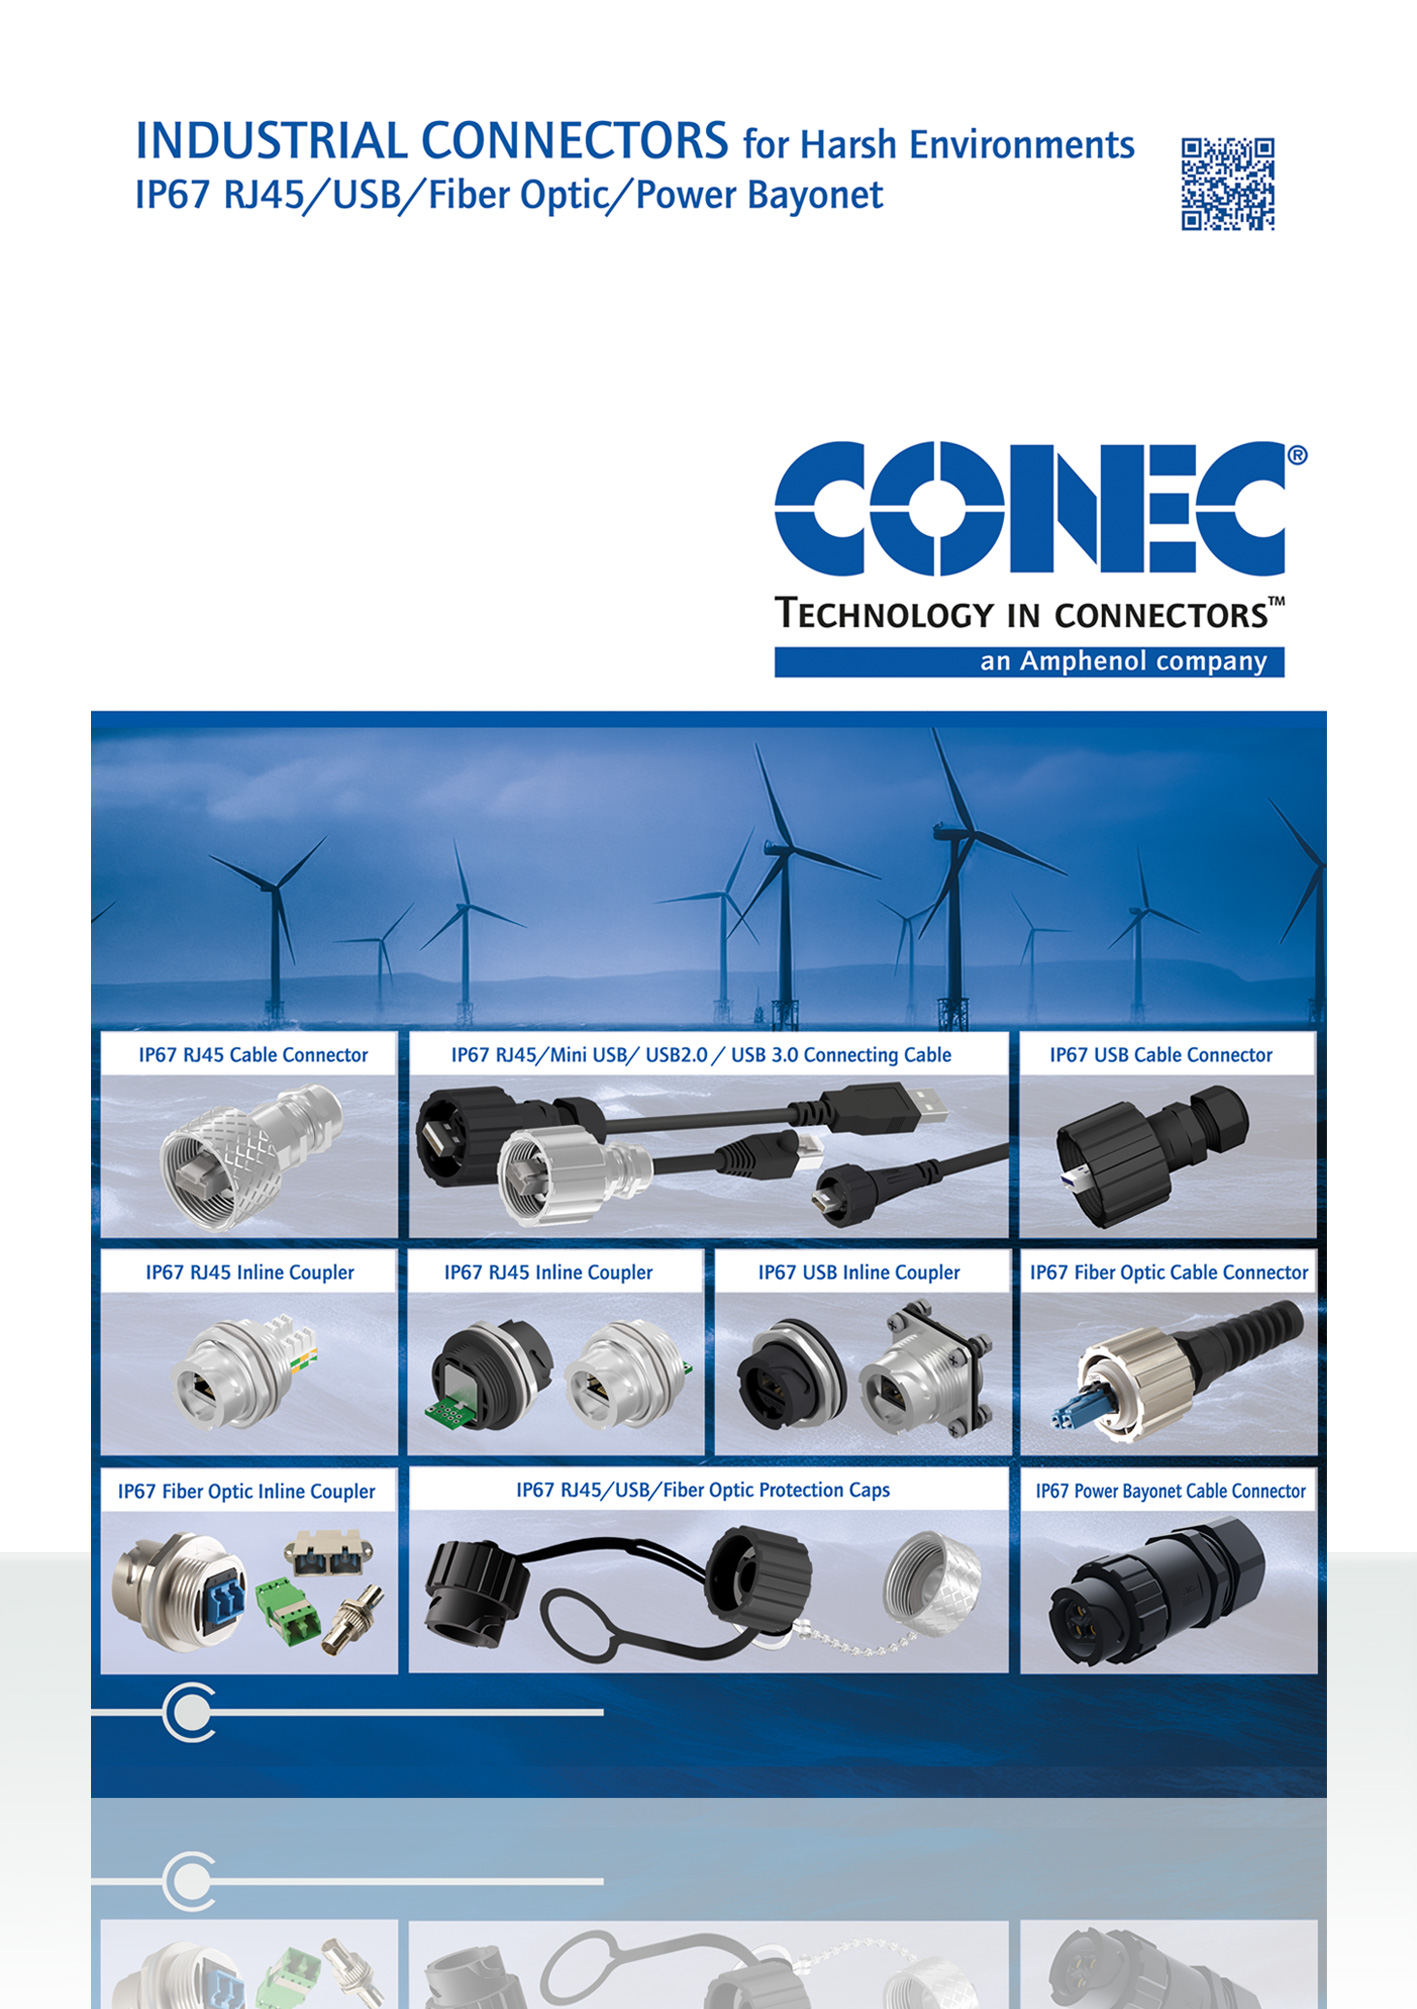 Industrial Connectors for harsh environments